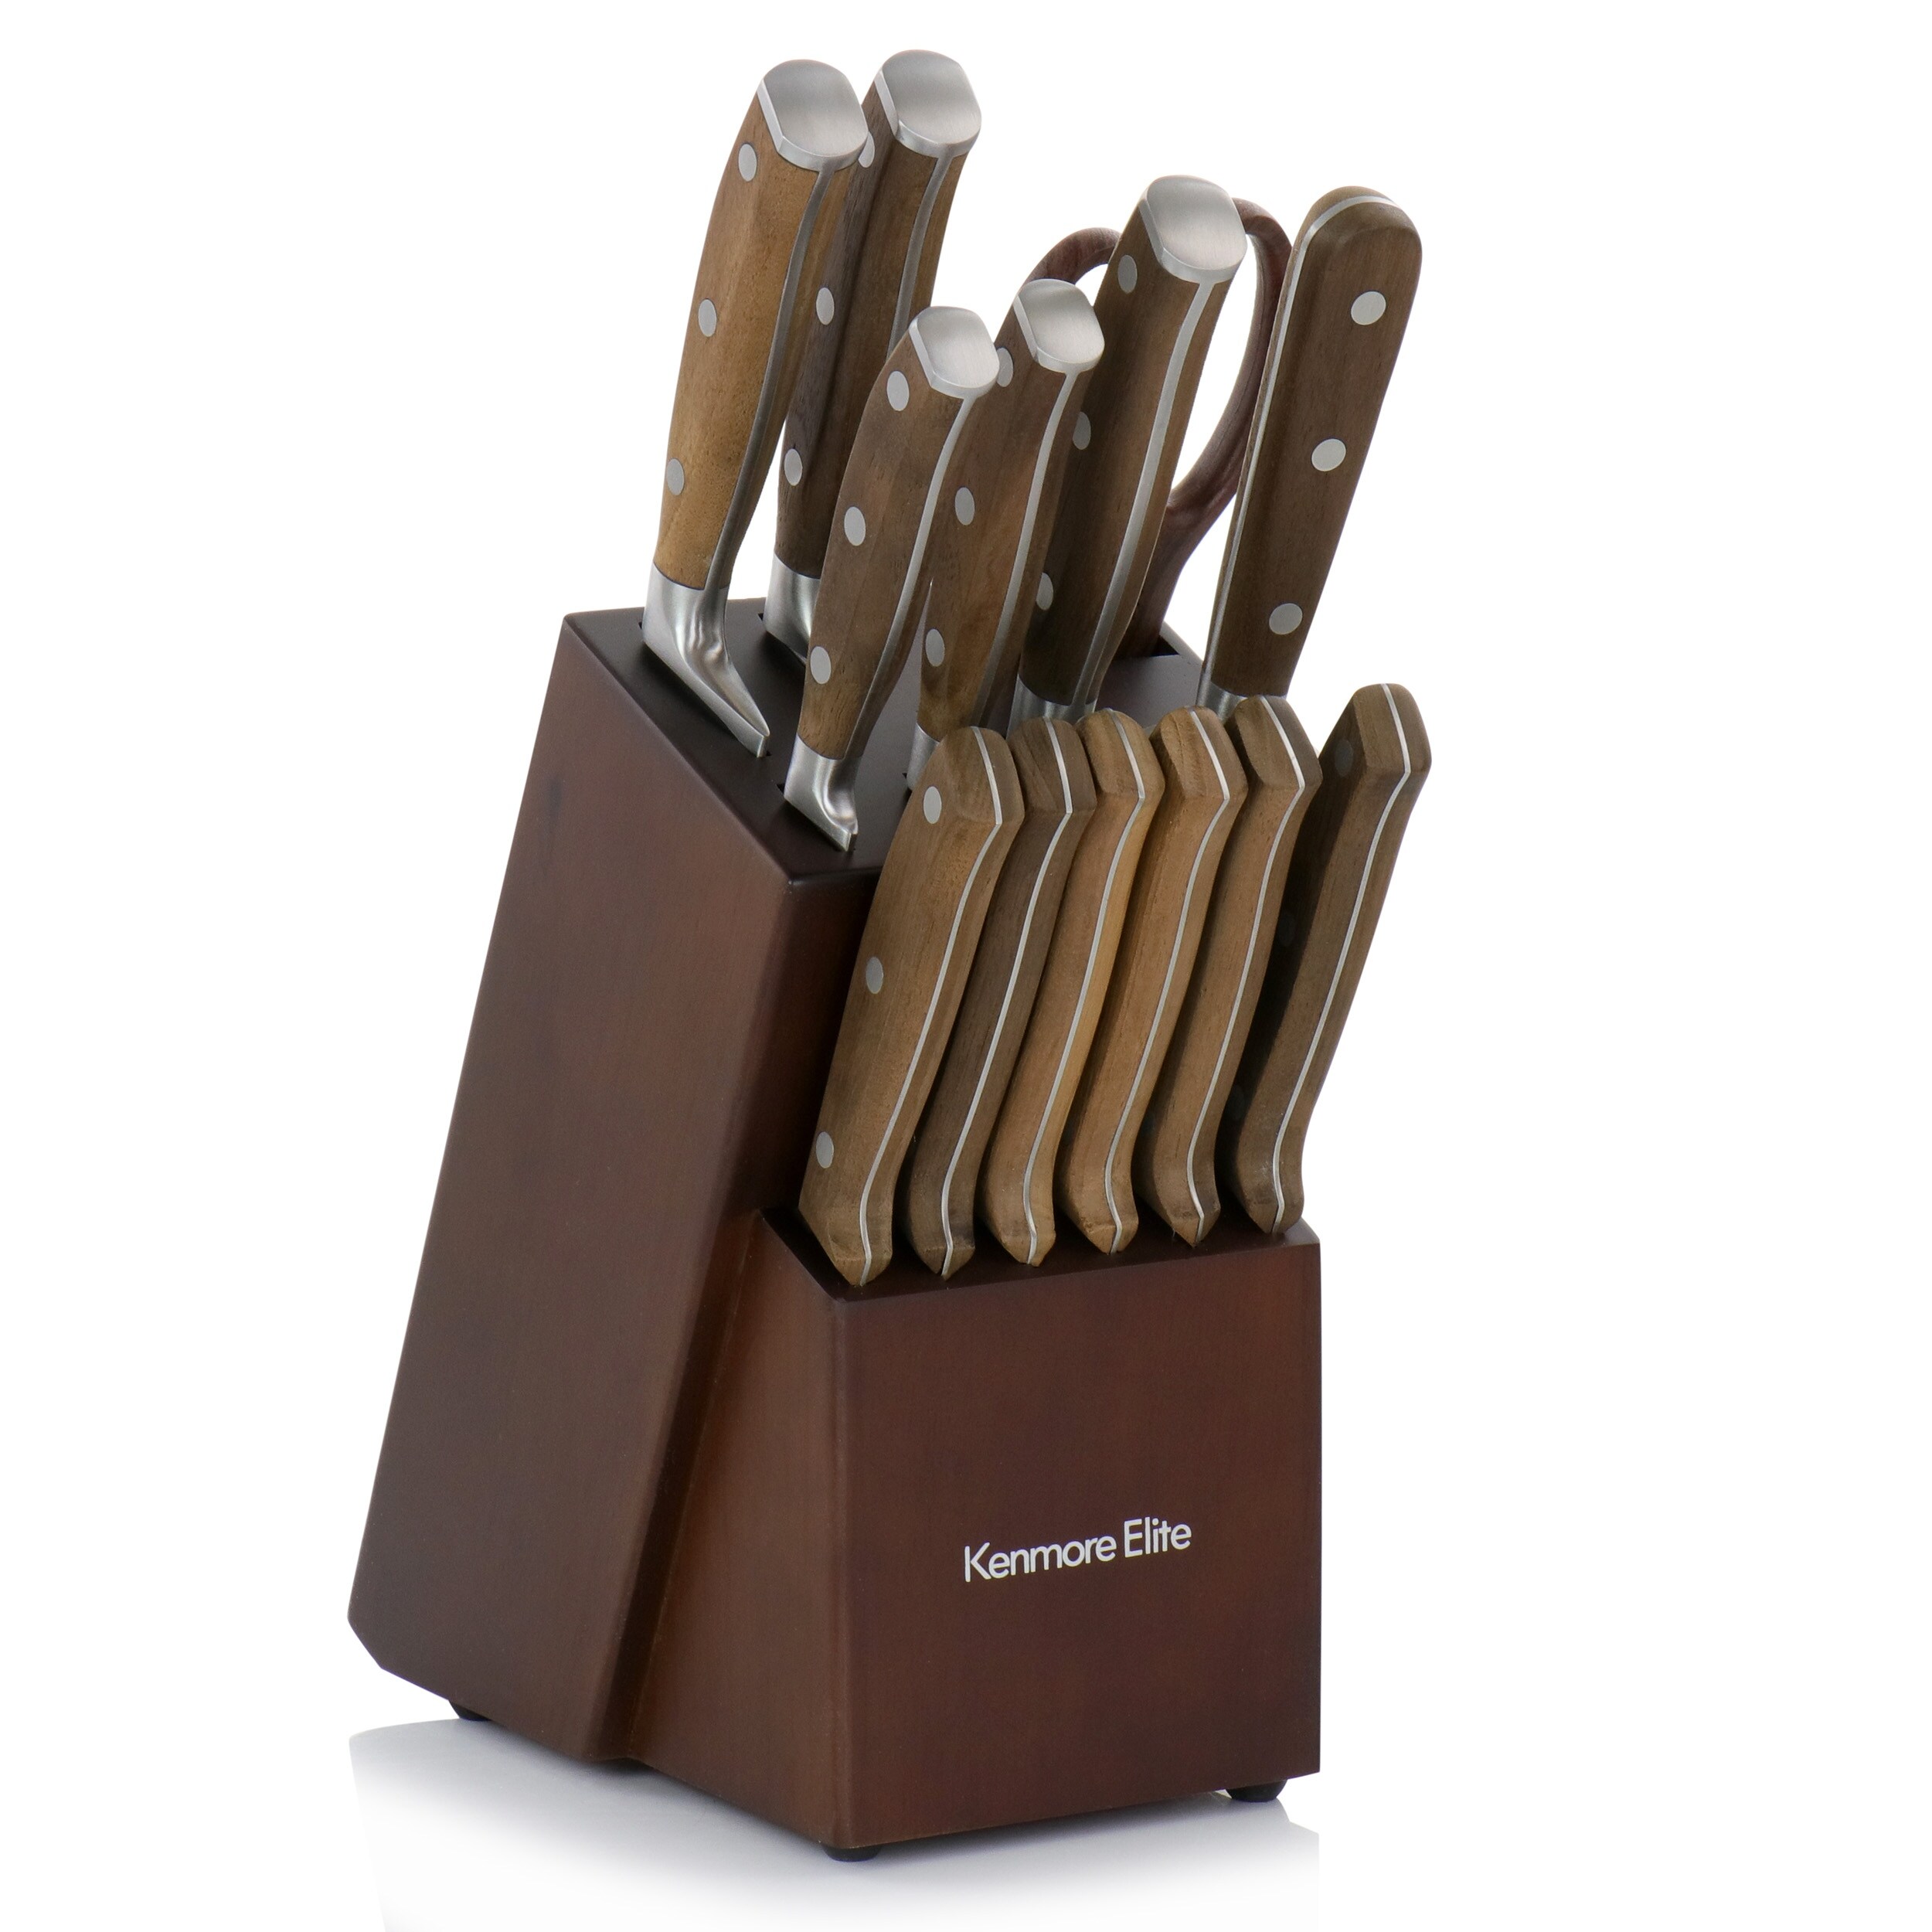 https://ak1.ostkcdn.com/images/products/is/images/direct/198c63912fa732150c262bc1ea9ead20234c4f85/Kenmore-Elite-Cooke-14-Piece-Stainless-Steel-Cutlery-Set-in-Dark-Brown.jpg